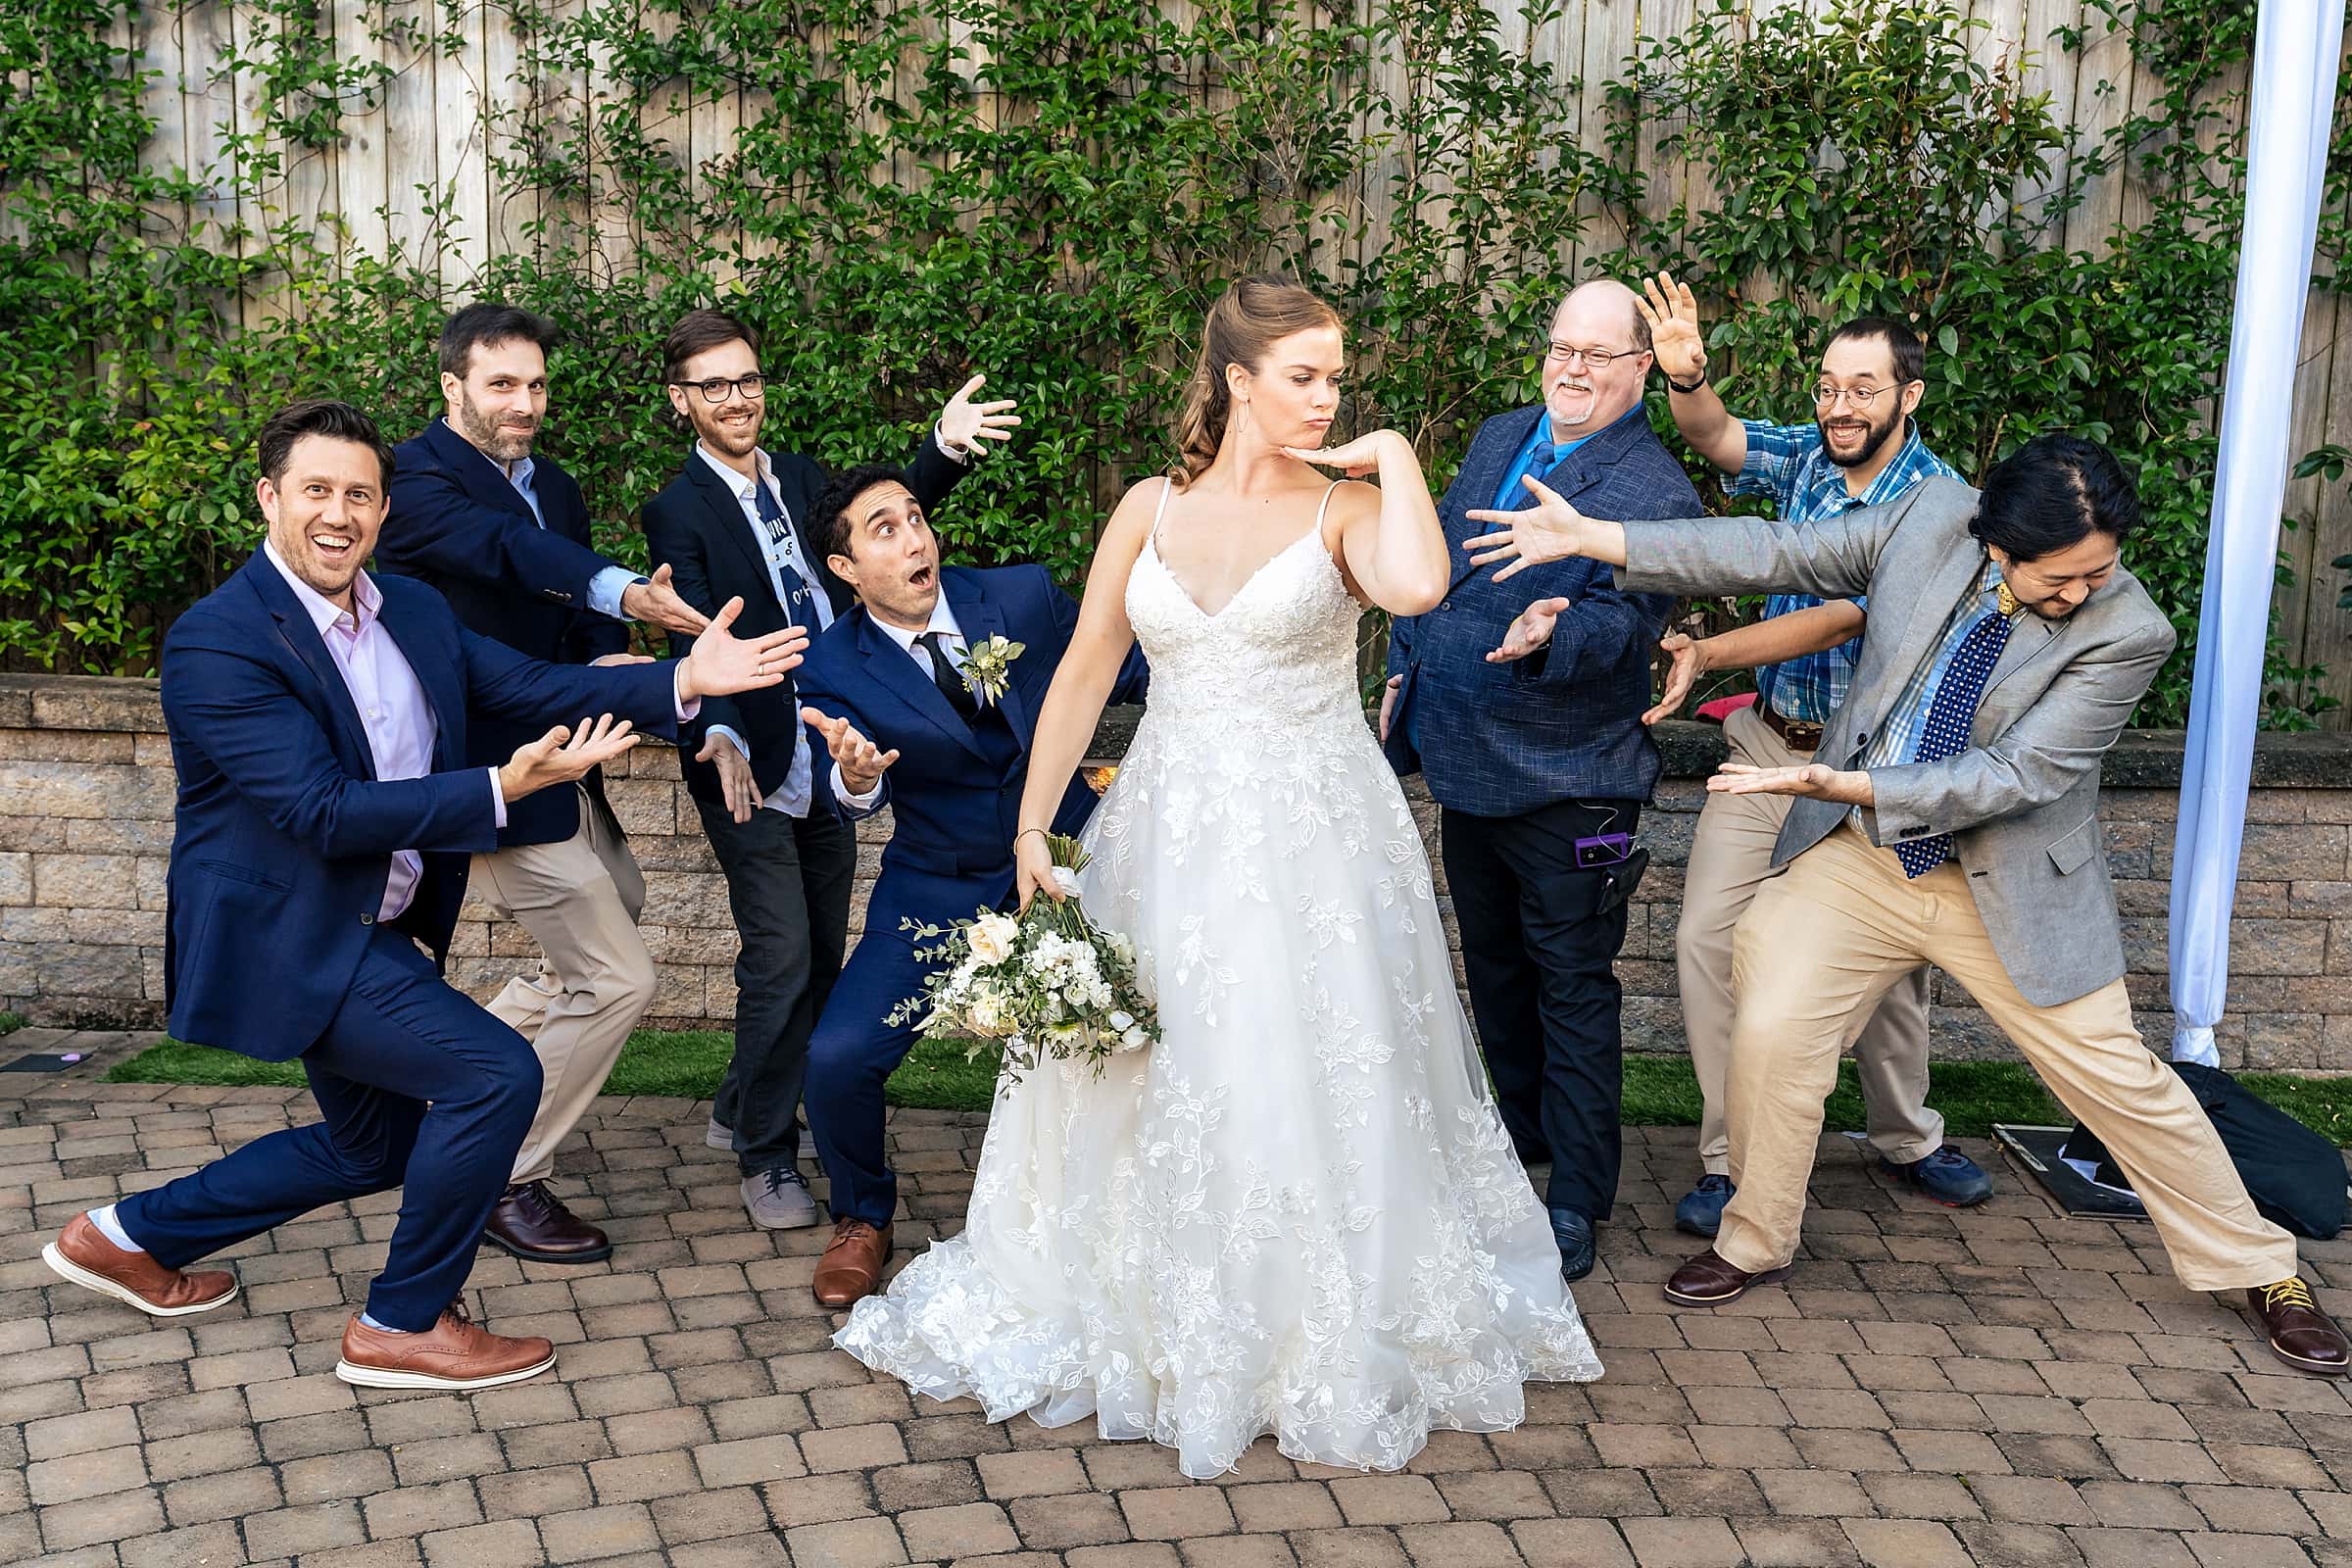 groomsmen send love to the bride on the wedding day